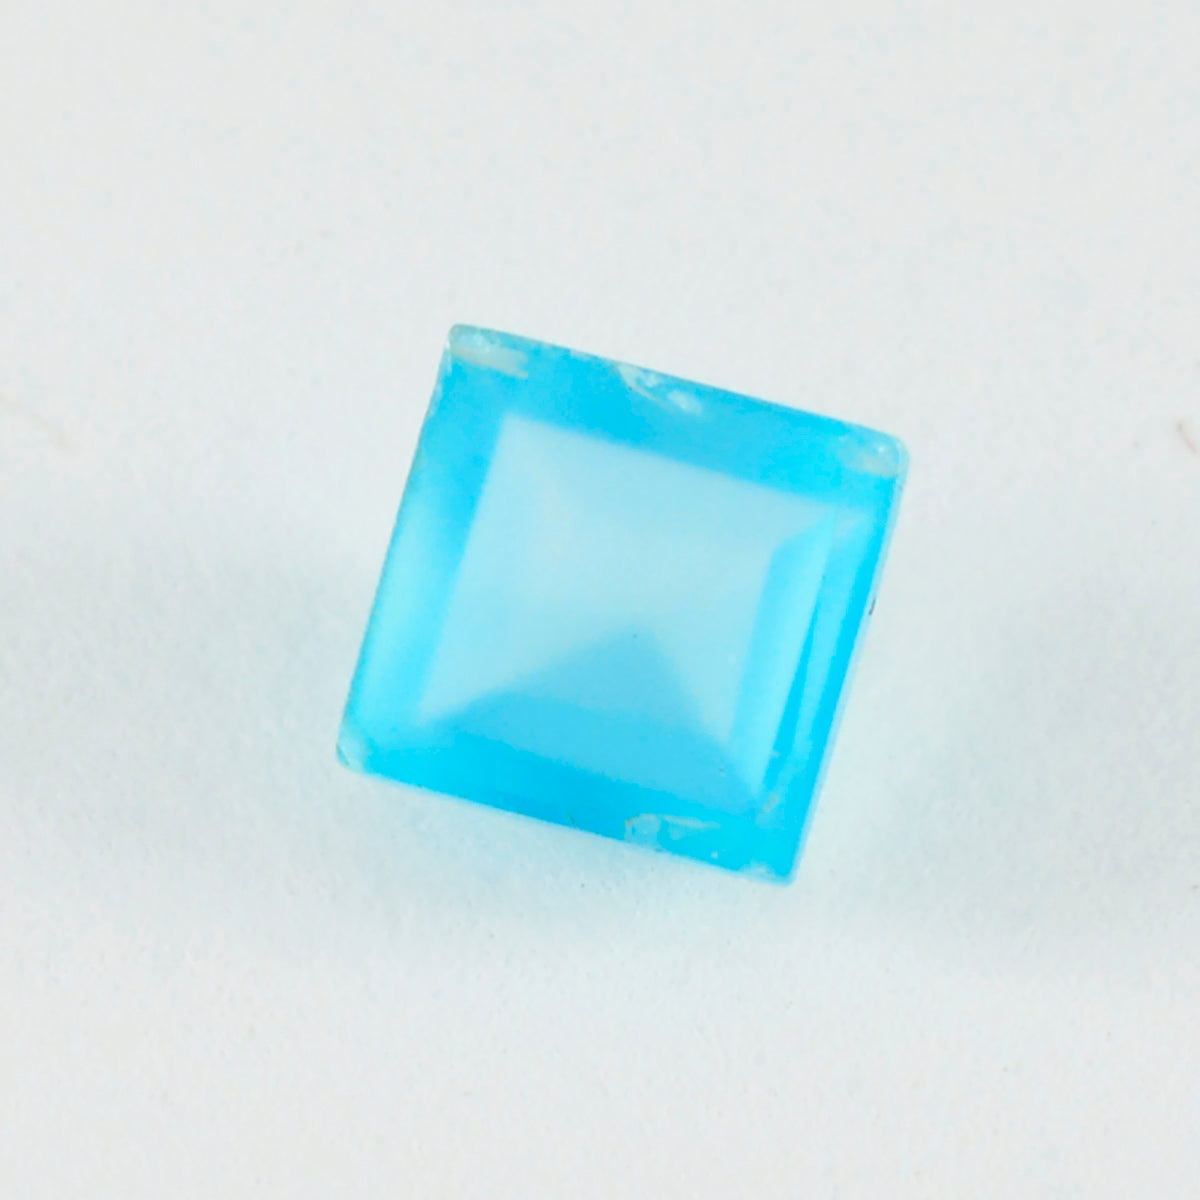 Riyogems 1PC Real Blue Chalcedony Faceted 11x11 mm Square Shape attractive Quality Gems